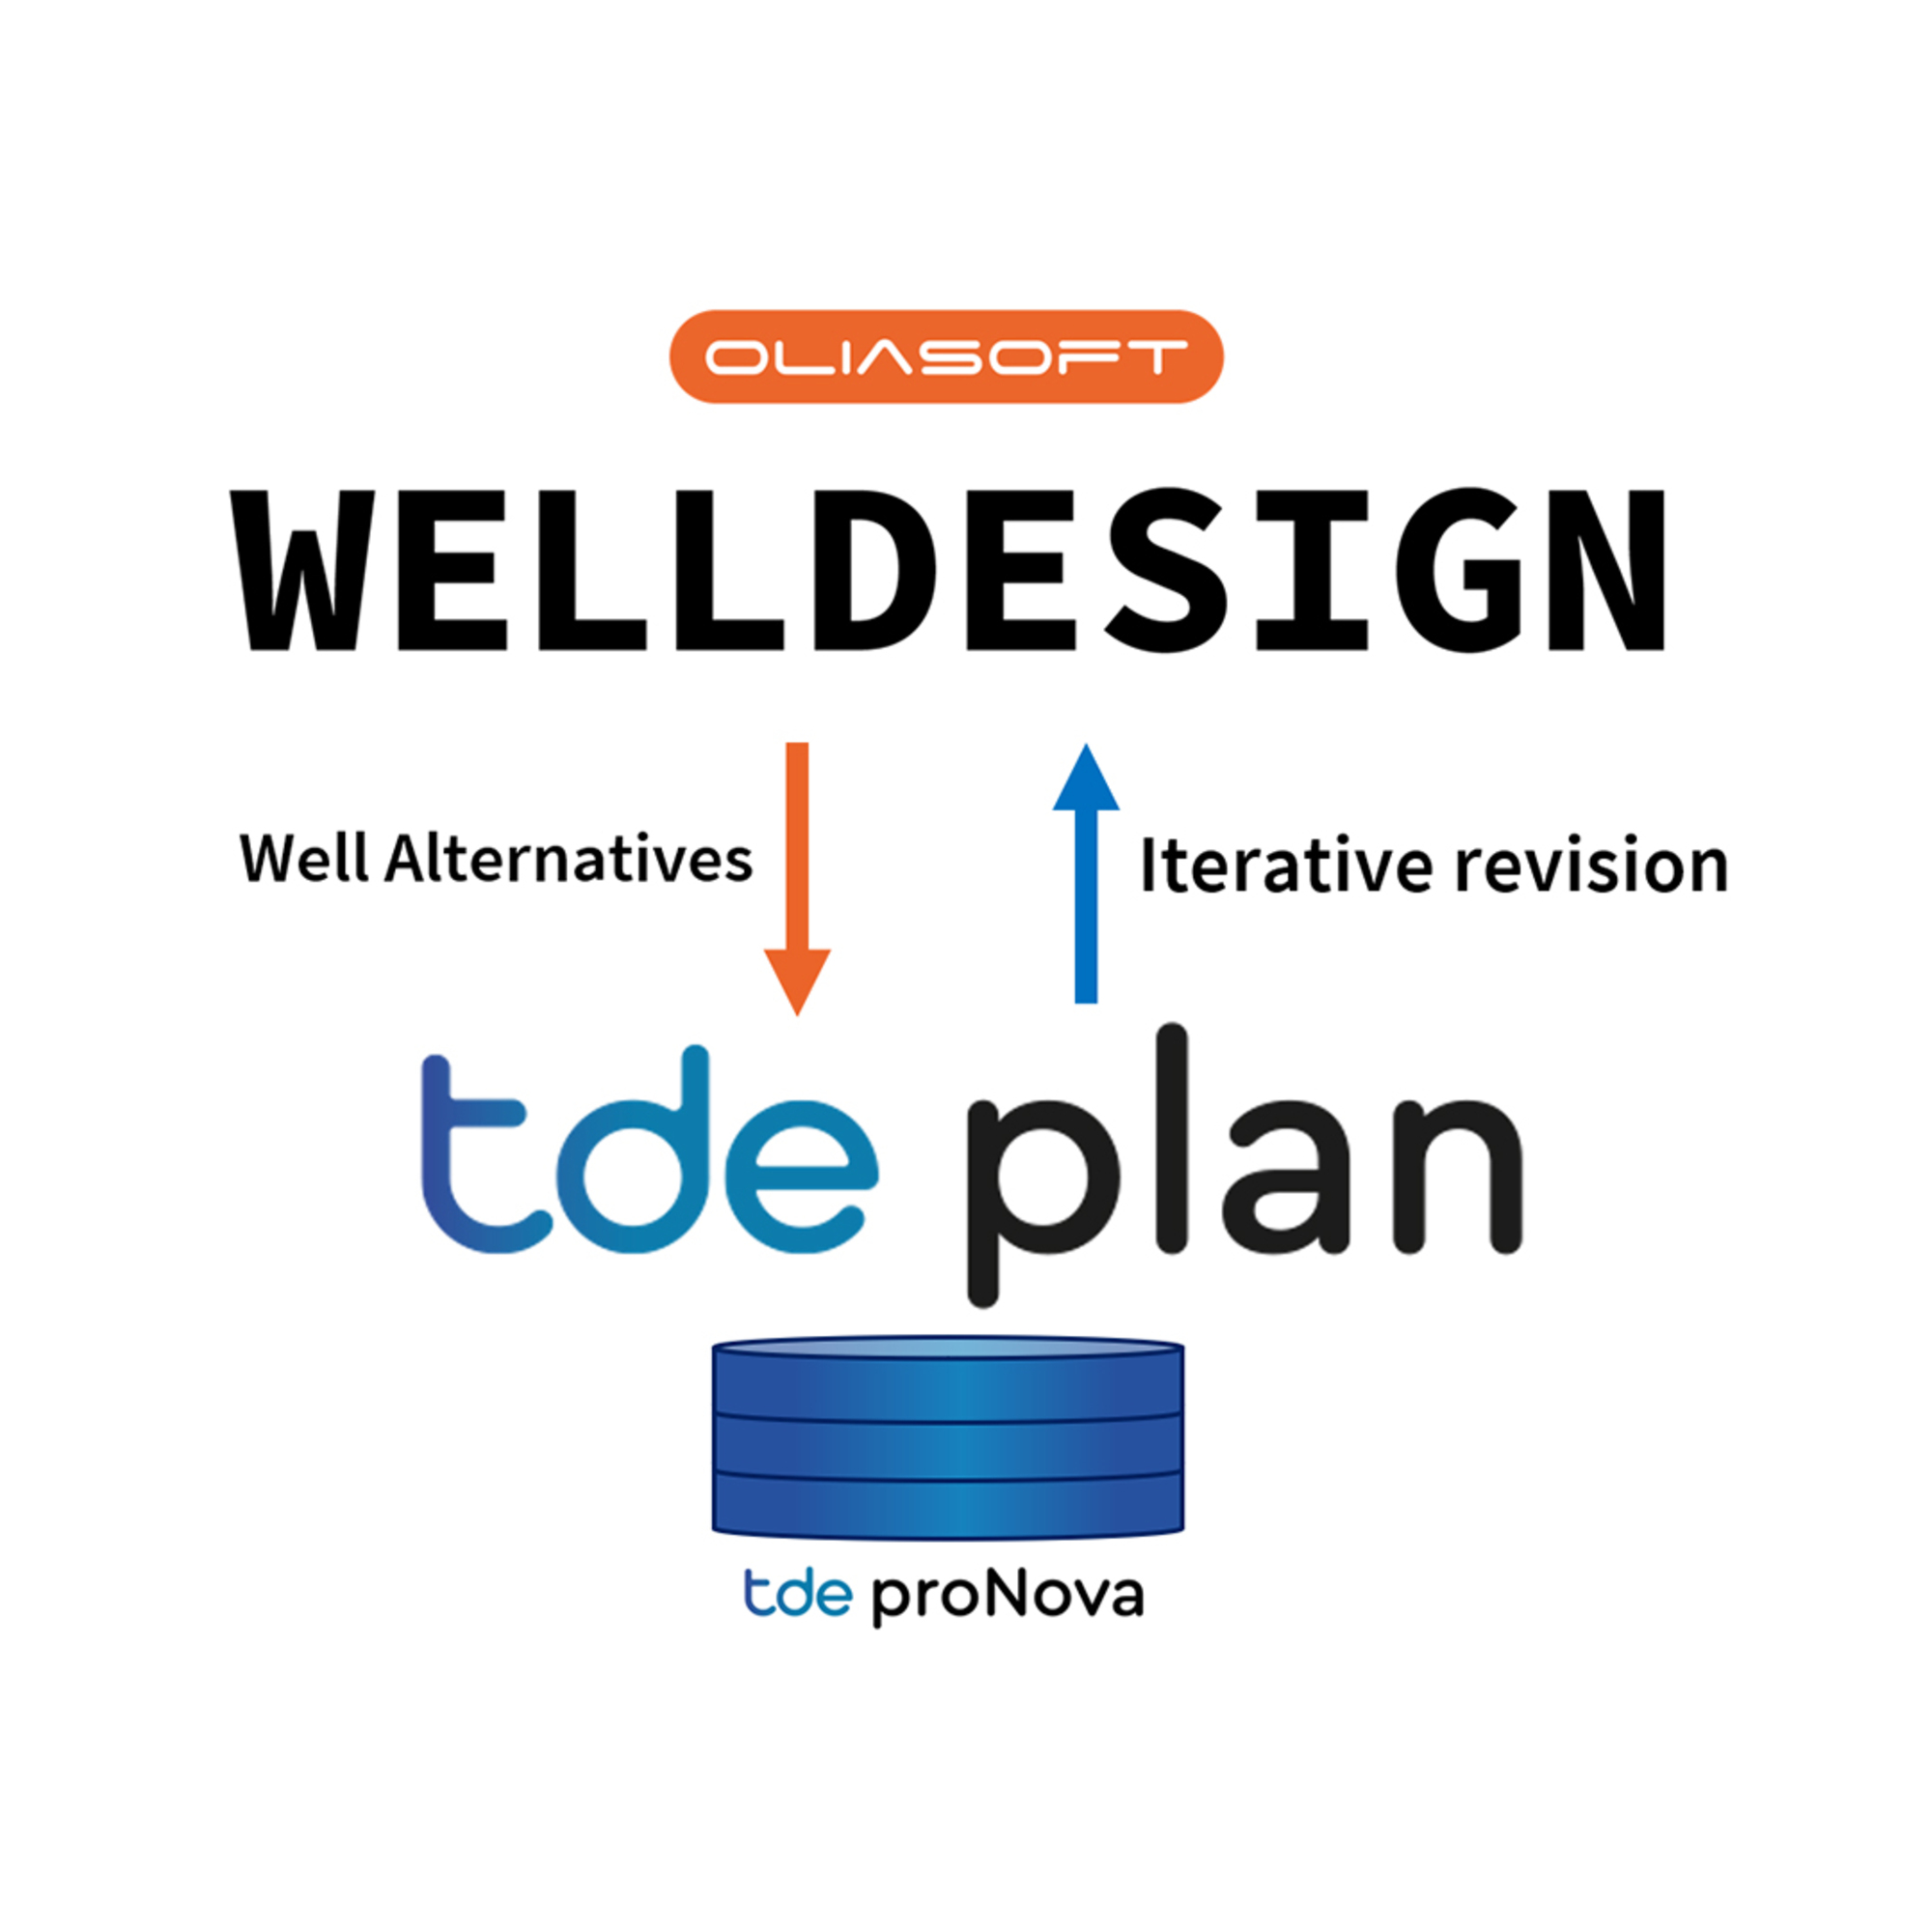 TDE Digital and Oliasoft are pleased to announce the launch of their collaboration to promote the integration of Oliasoft WellDesign®, a fully integrated, end-to-end well engineering design tool, with tde plan’s metrics-driven well-planning application.